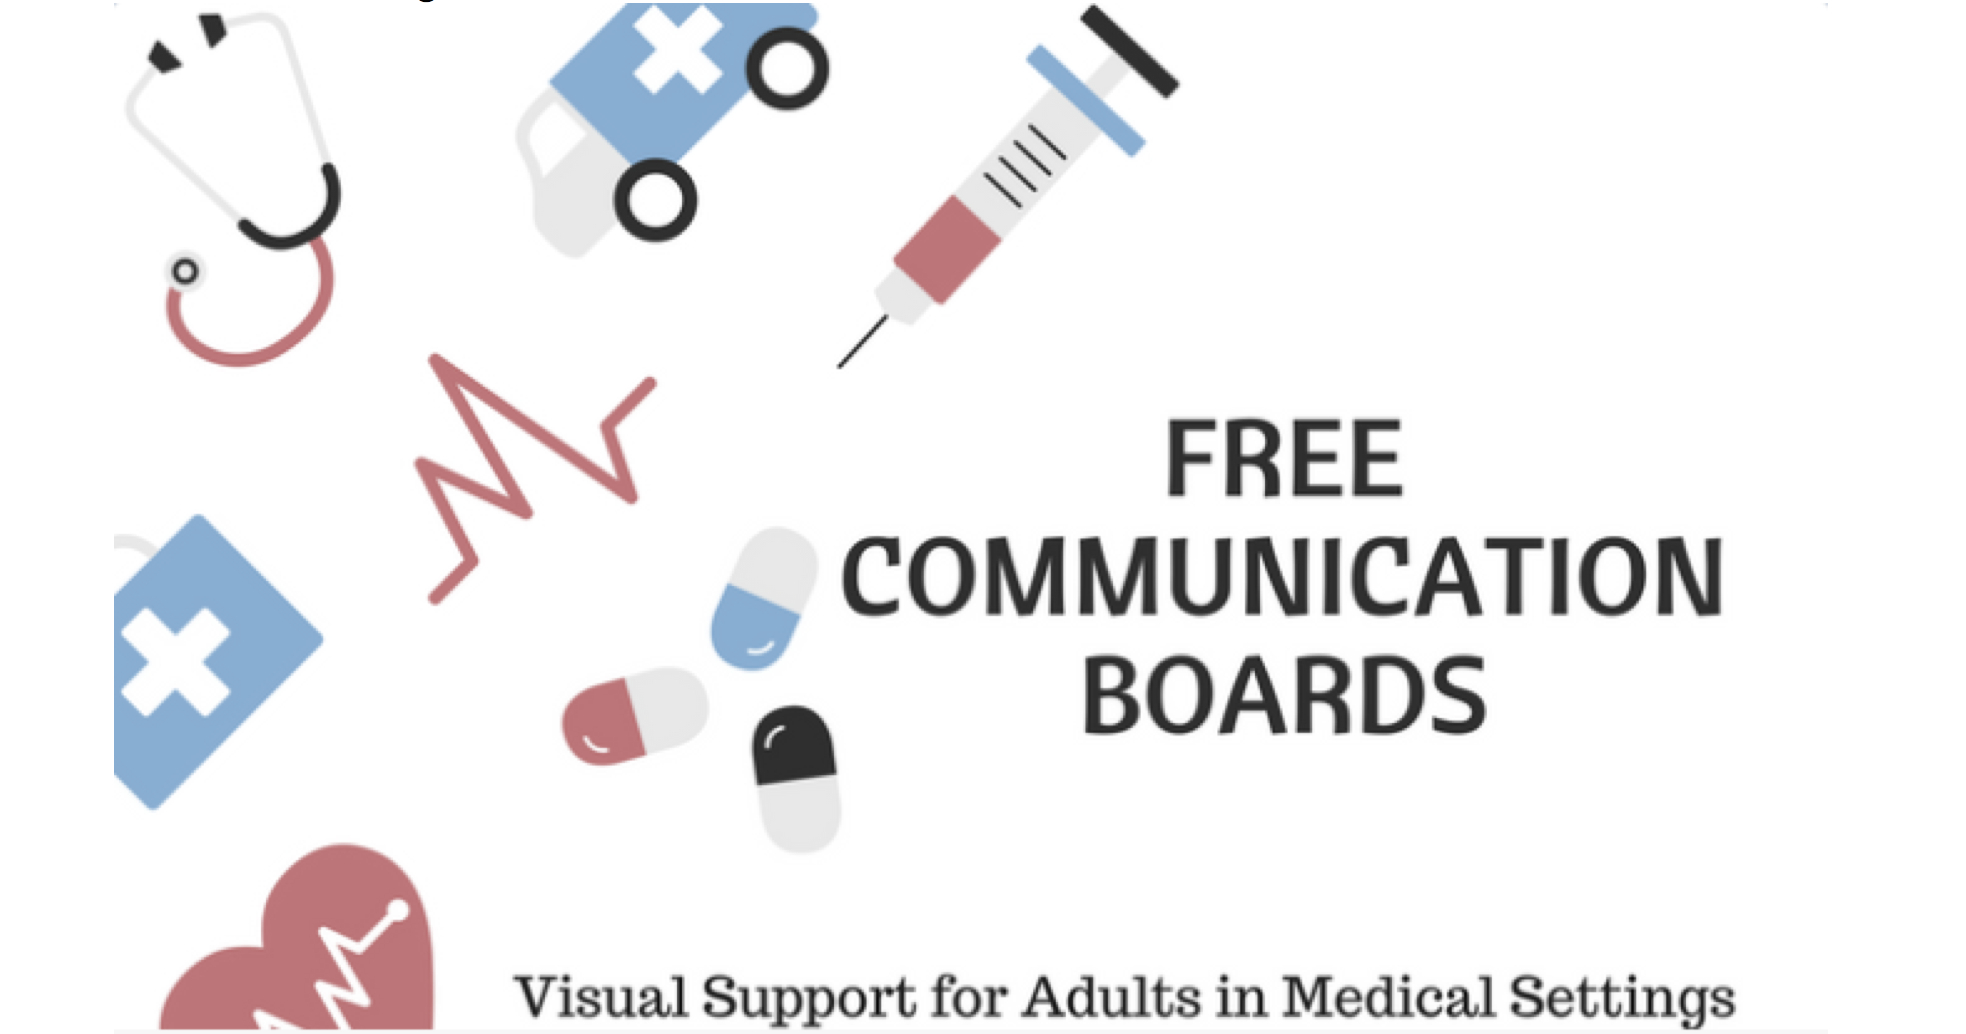 Downloadable Communication Boards For Adults In Health Care Settings - Free Printable Communication Boards For Adults